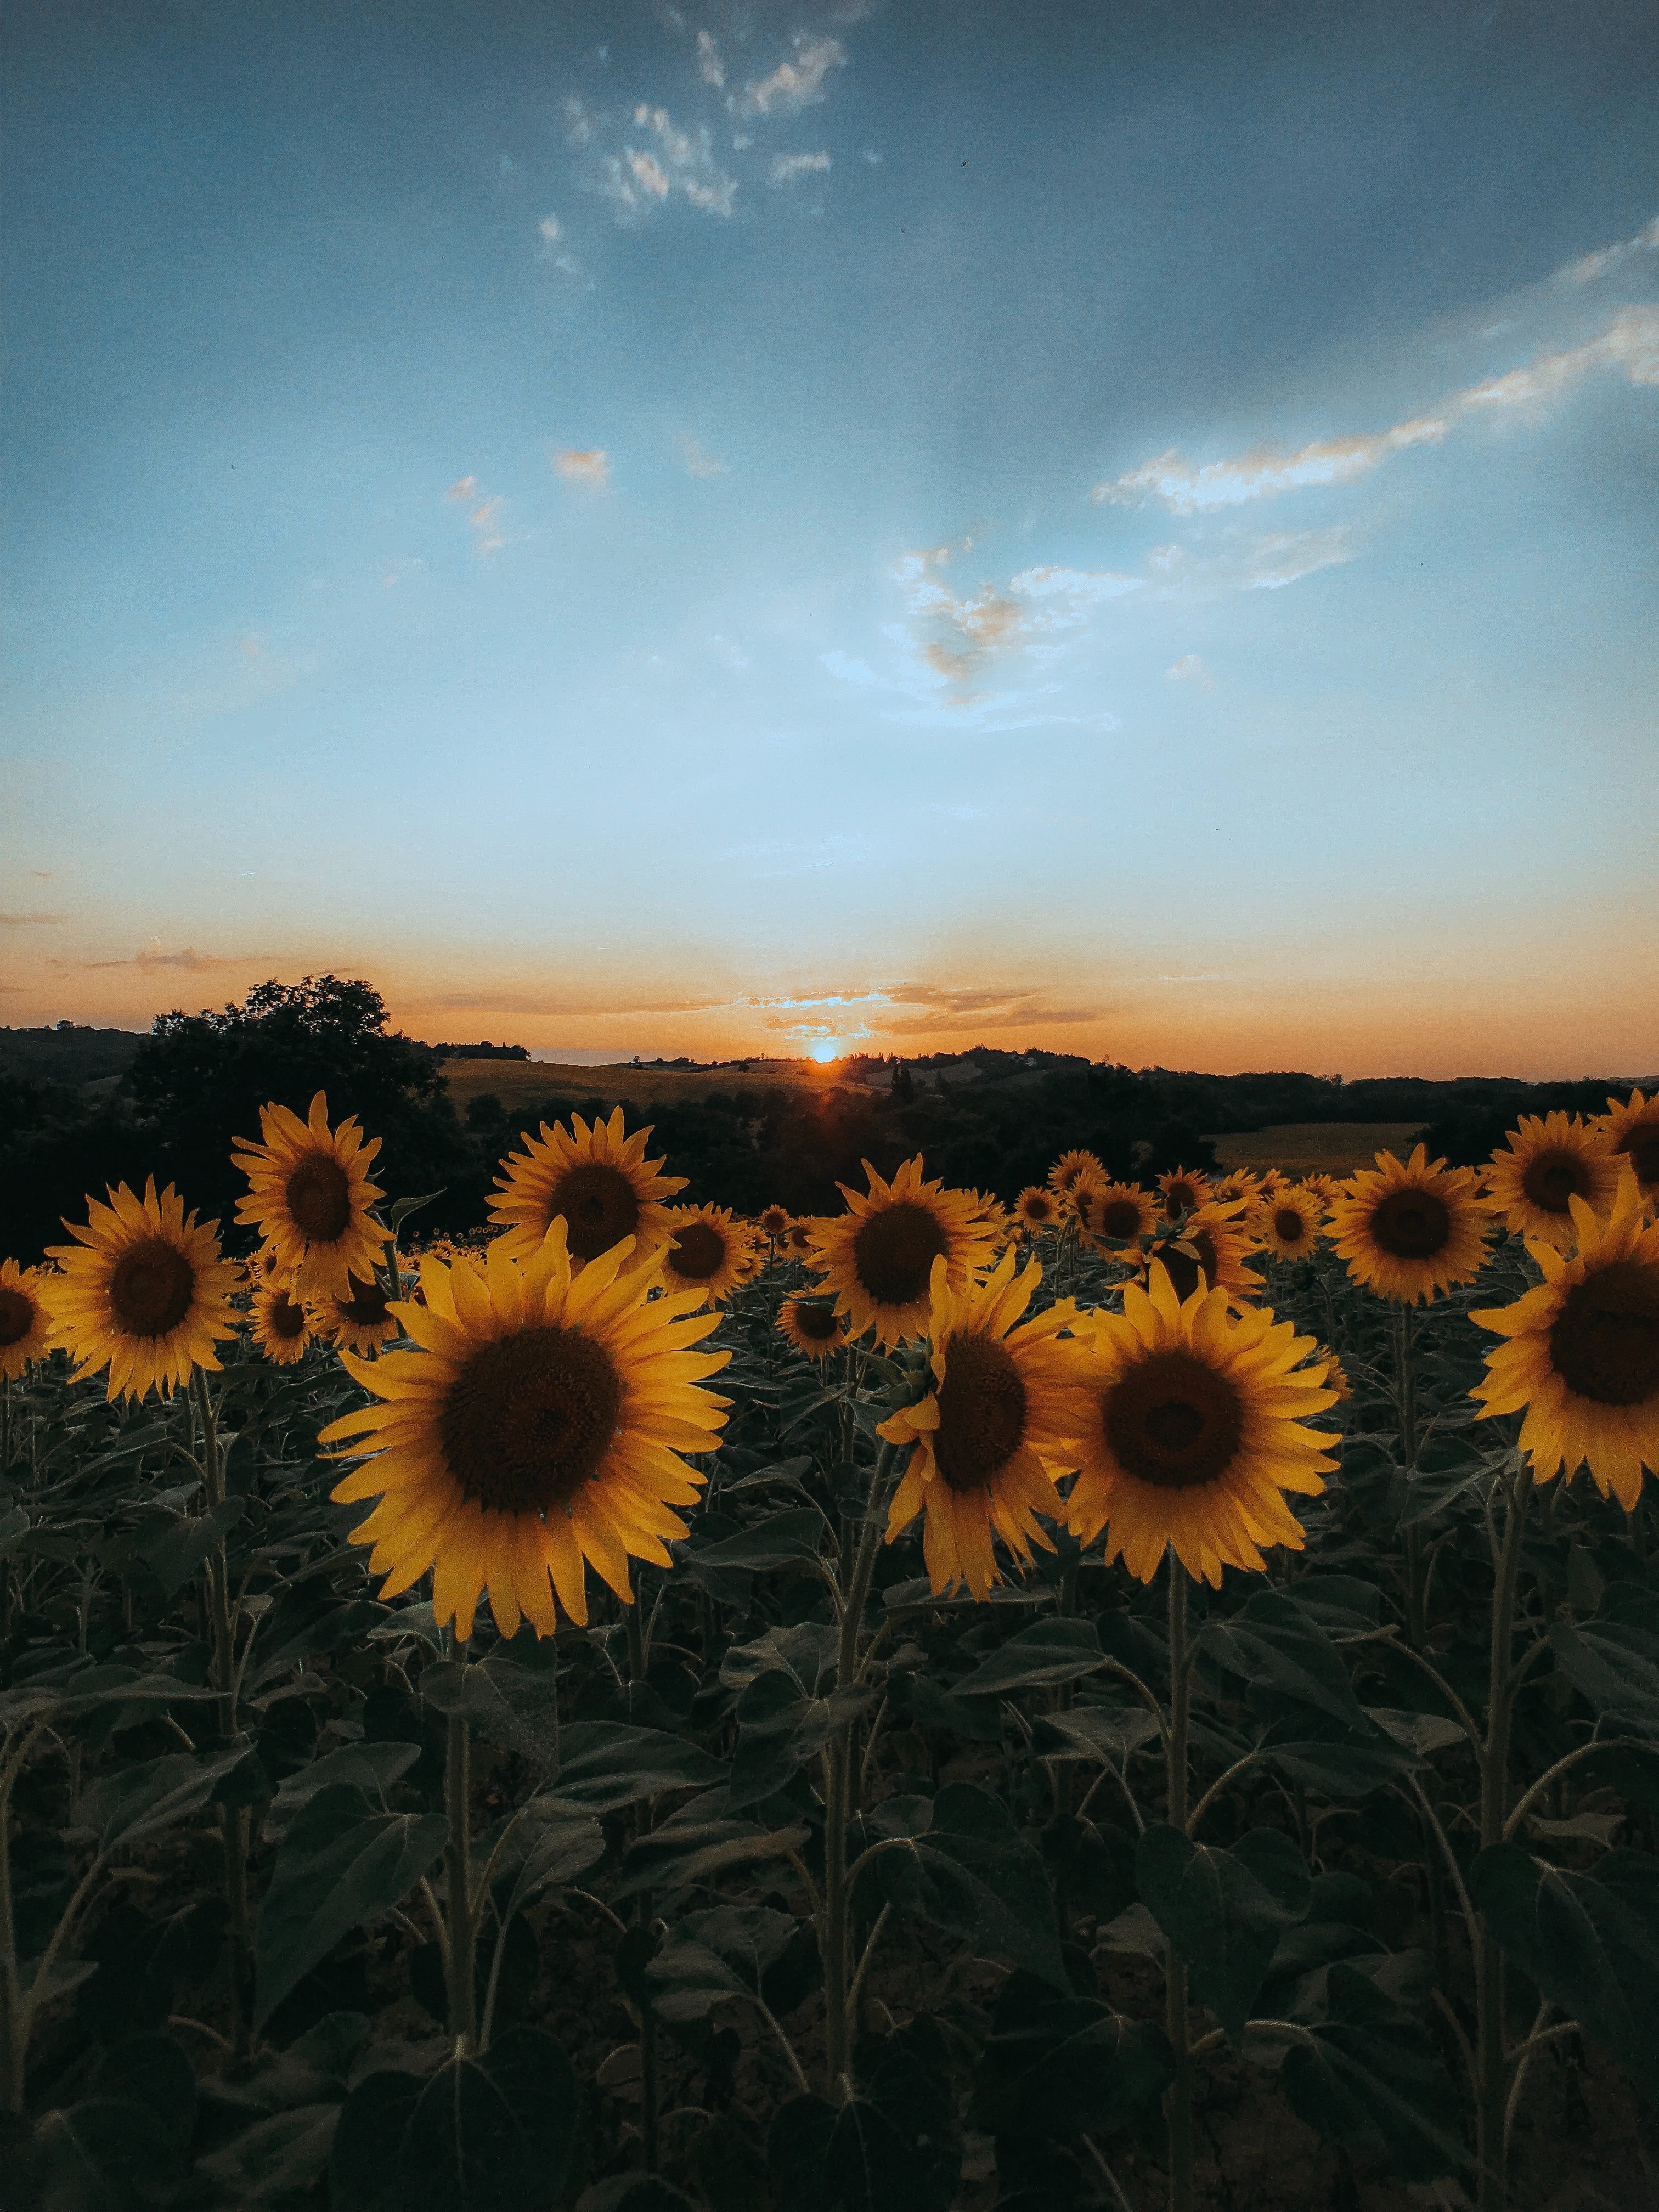 56620 download wallpaper sunflowers, nature, flowers, sunset, yellow, field screensavers and pictures for free